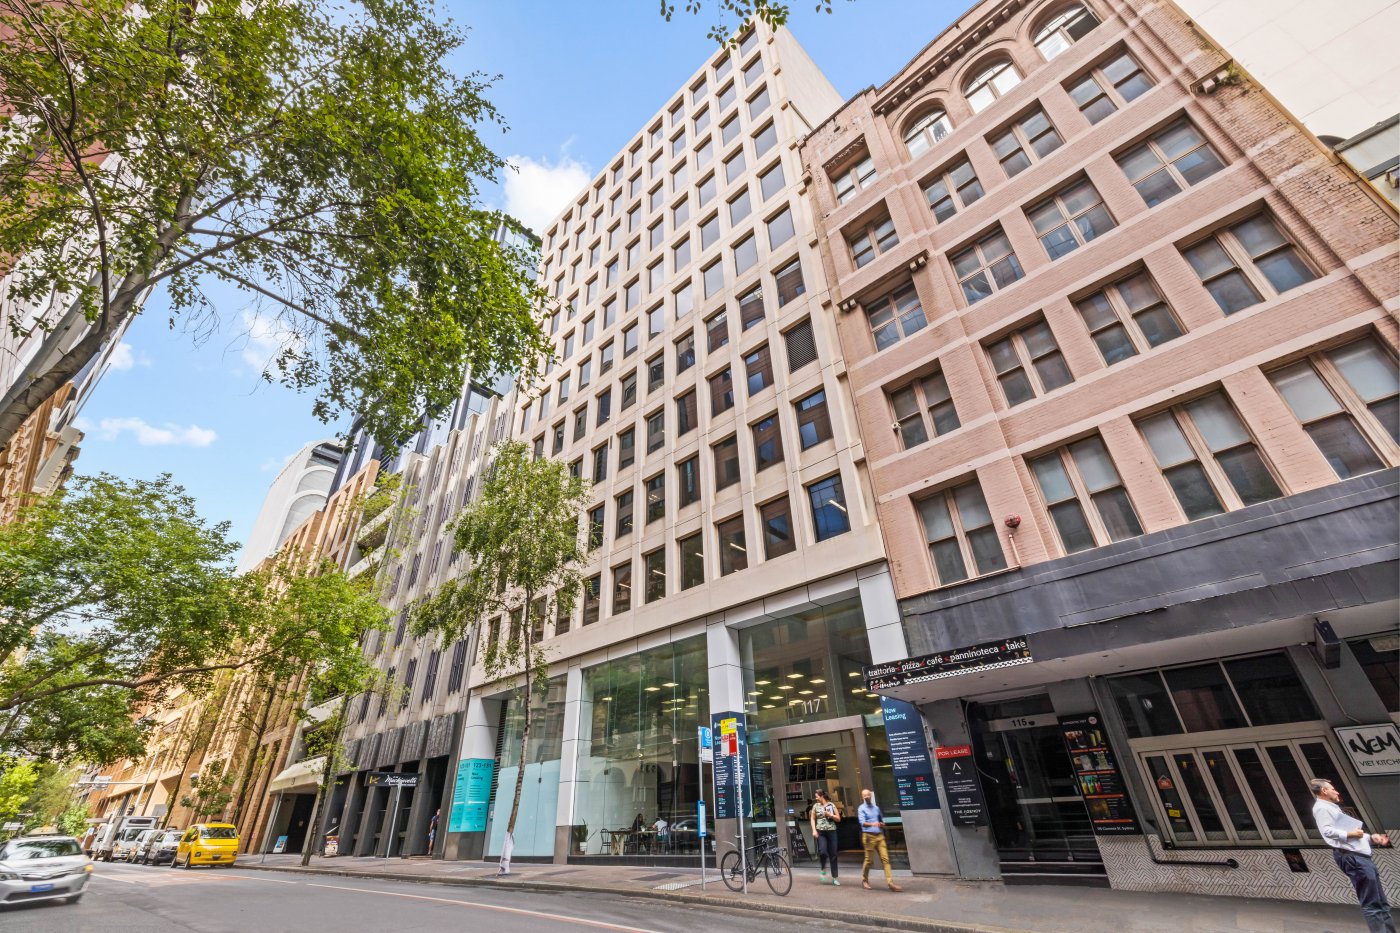 117 Clarence Street, Sydney NSW - Barings Real Estate Australia, Private  Equity Real Estate Investment Group